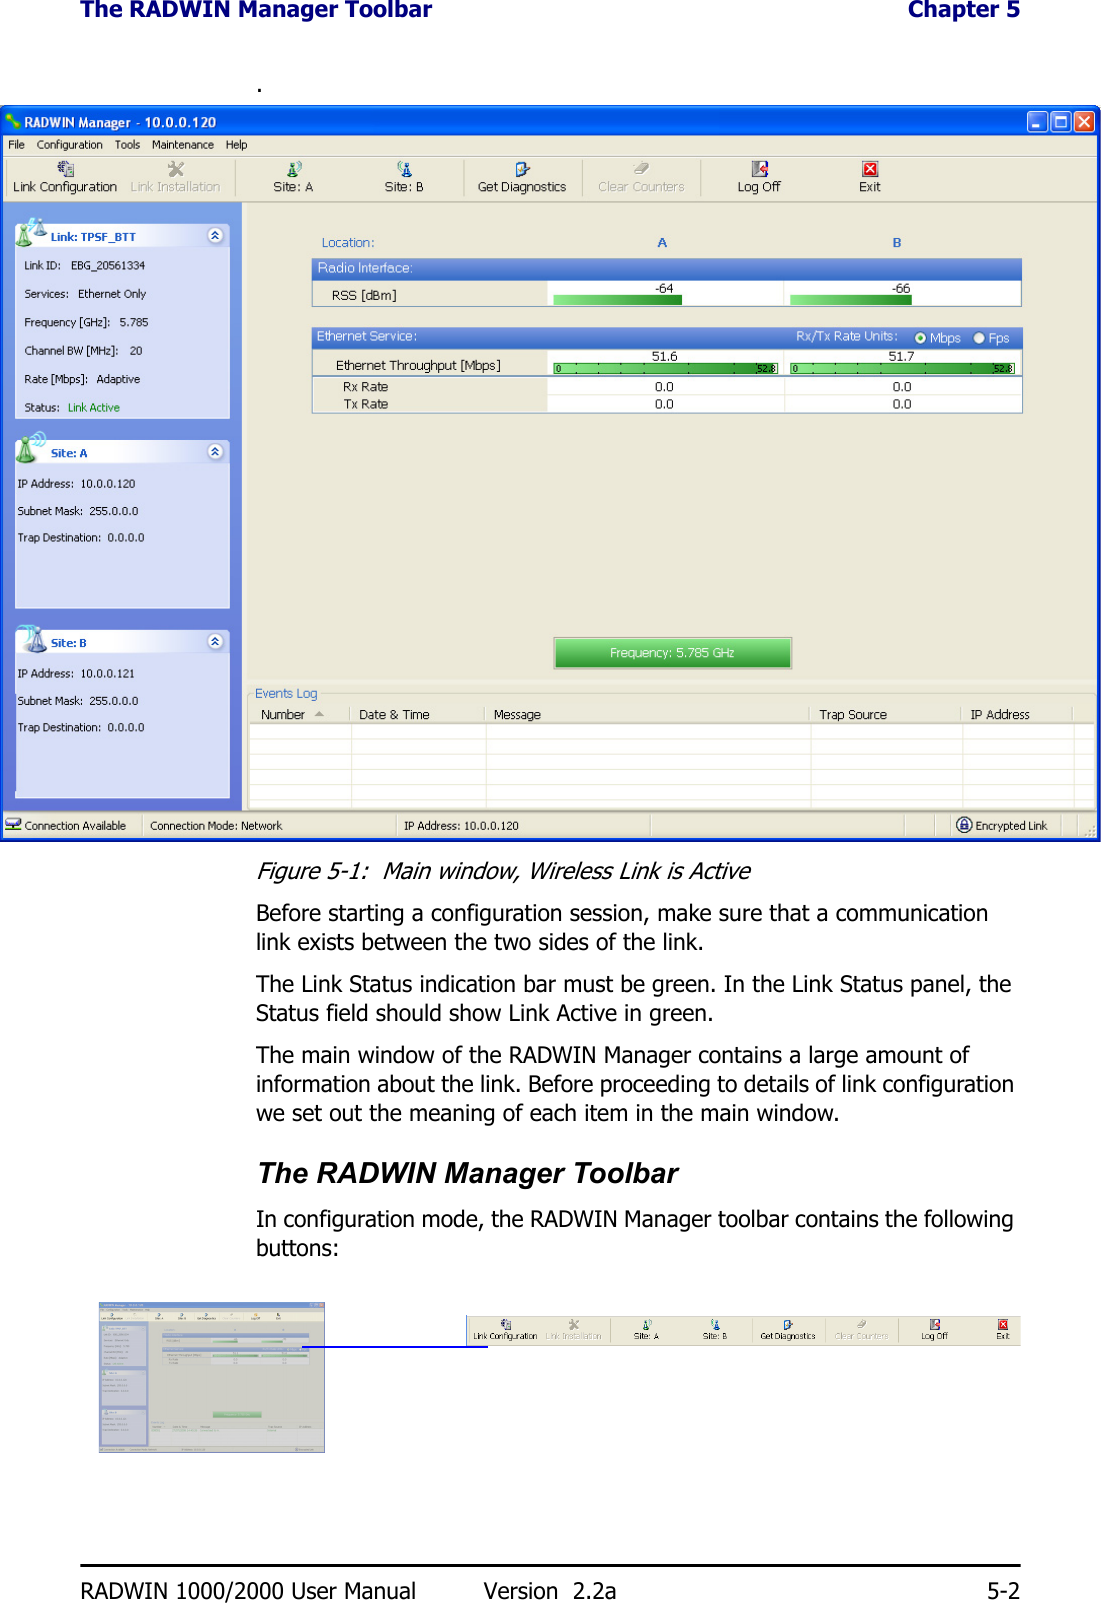 The RADWIN Manager Toolbar  Chapter 5RADWIN 1000/2000 User Manual Version  2.2a 5-2.Figure 5-1:  Main window, Wireless Link is ActiveBefore starting a configuration session, make sure that a communication link exists between the two sides of the link.The Link Status indication bar must be green. In the Link Status panel, the Status field should show Link Active in green.The main window of the RADWIN Manager contains a large amount of information about the link. Before proceeding to details of link configuration we set out the meaning of each item in the main window.The RADWIN Manager ToolbarIn configuration mode, the RADWIN Manager toolbar contains the following buttons: